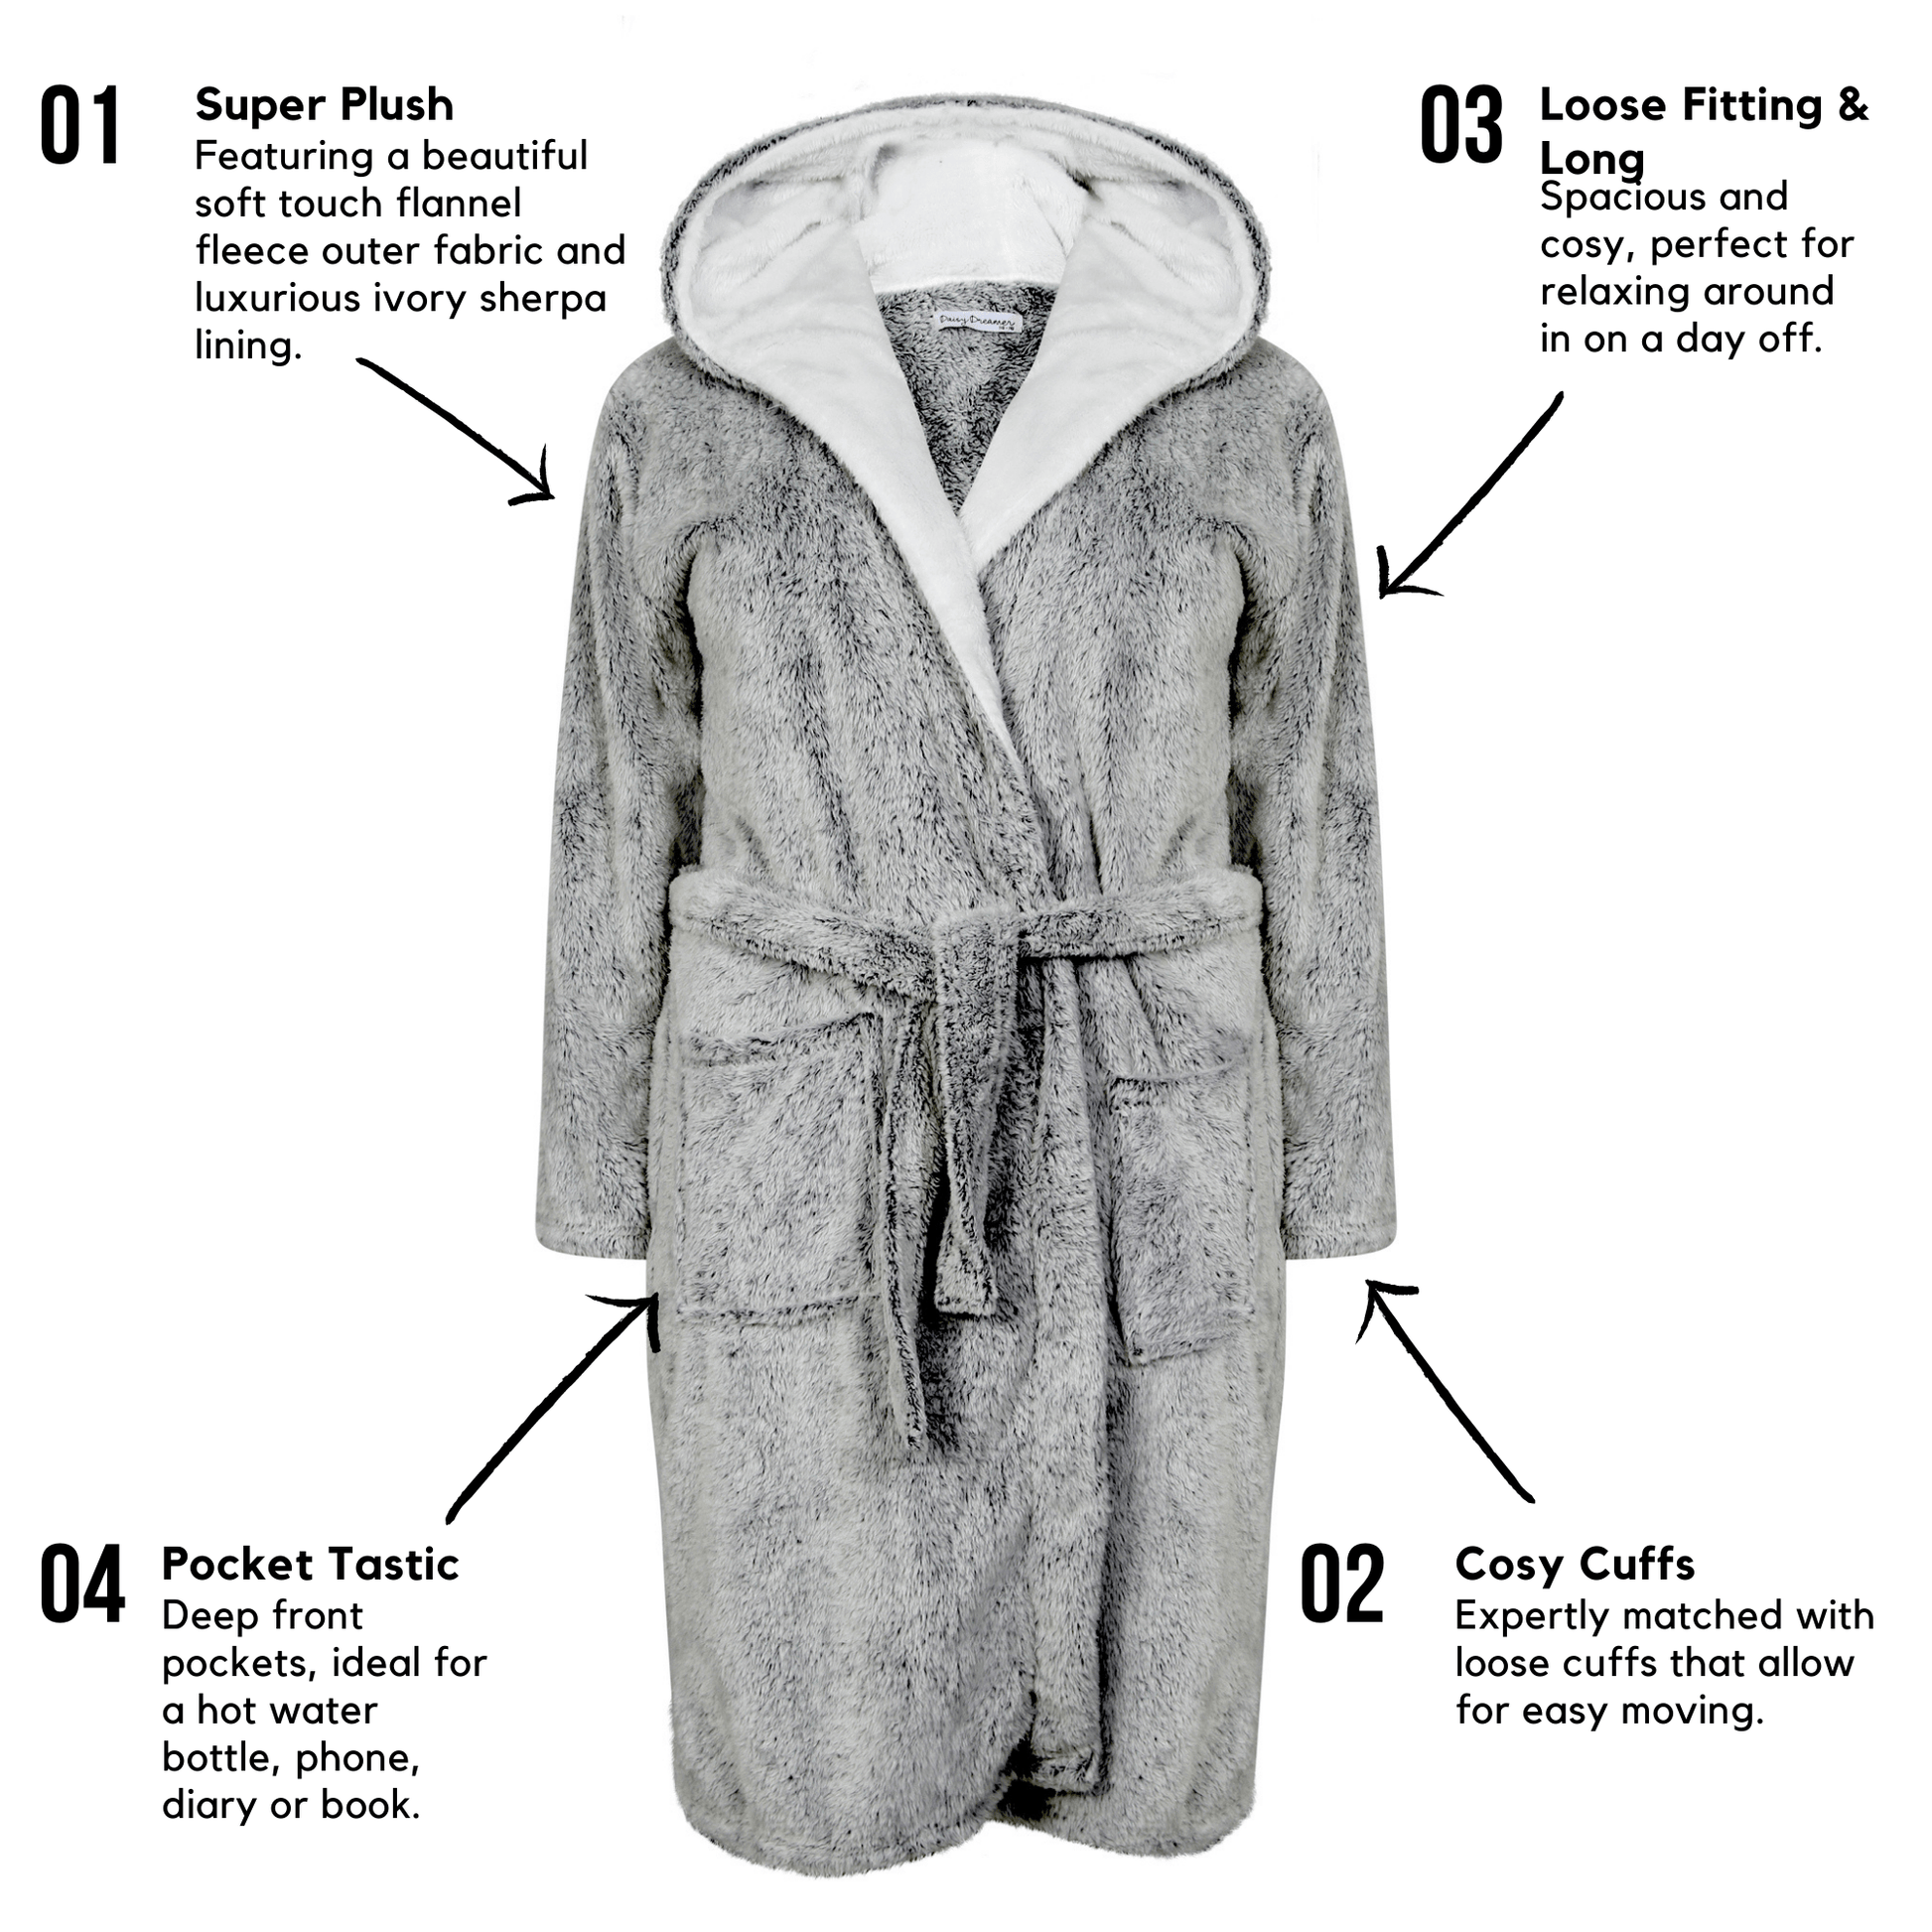 Shimmer Grey Plush Fleece Hooded Robe Dressing Gown With Reversible Sherpa Lining Daisy Dreamer Dressing Gown